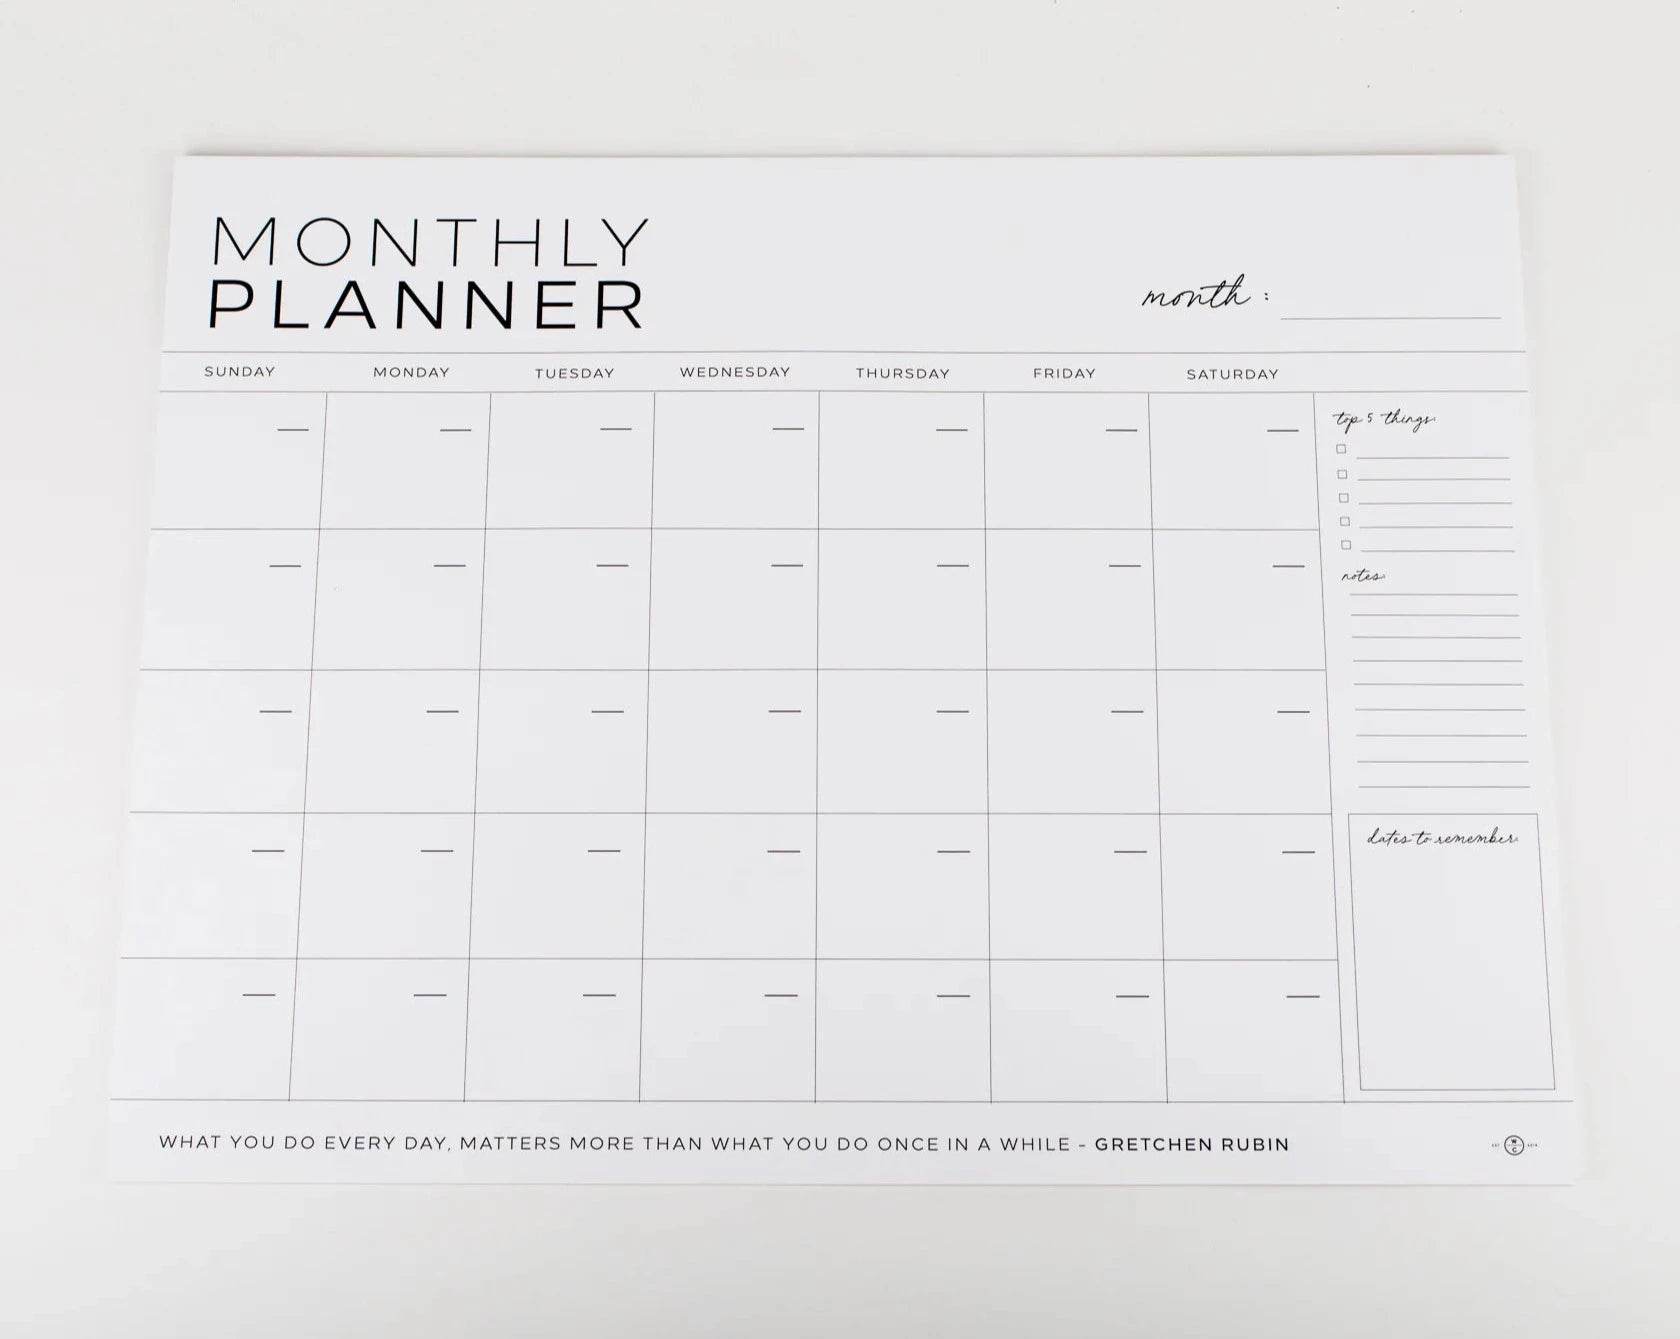 Large Monthly Planner